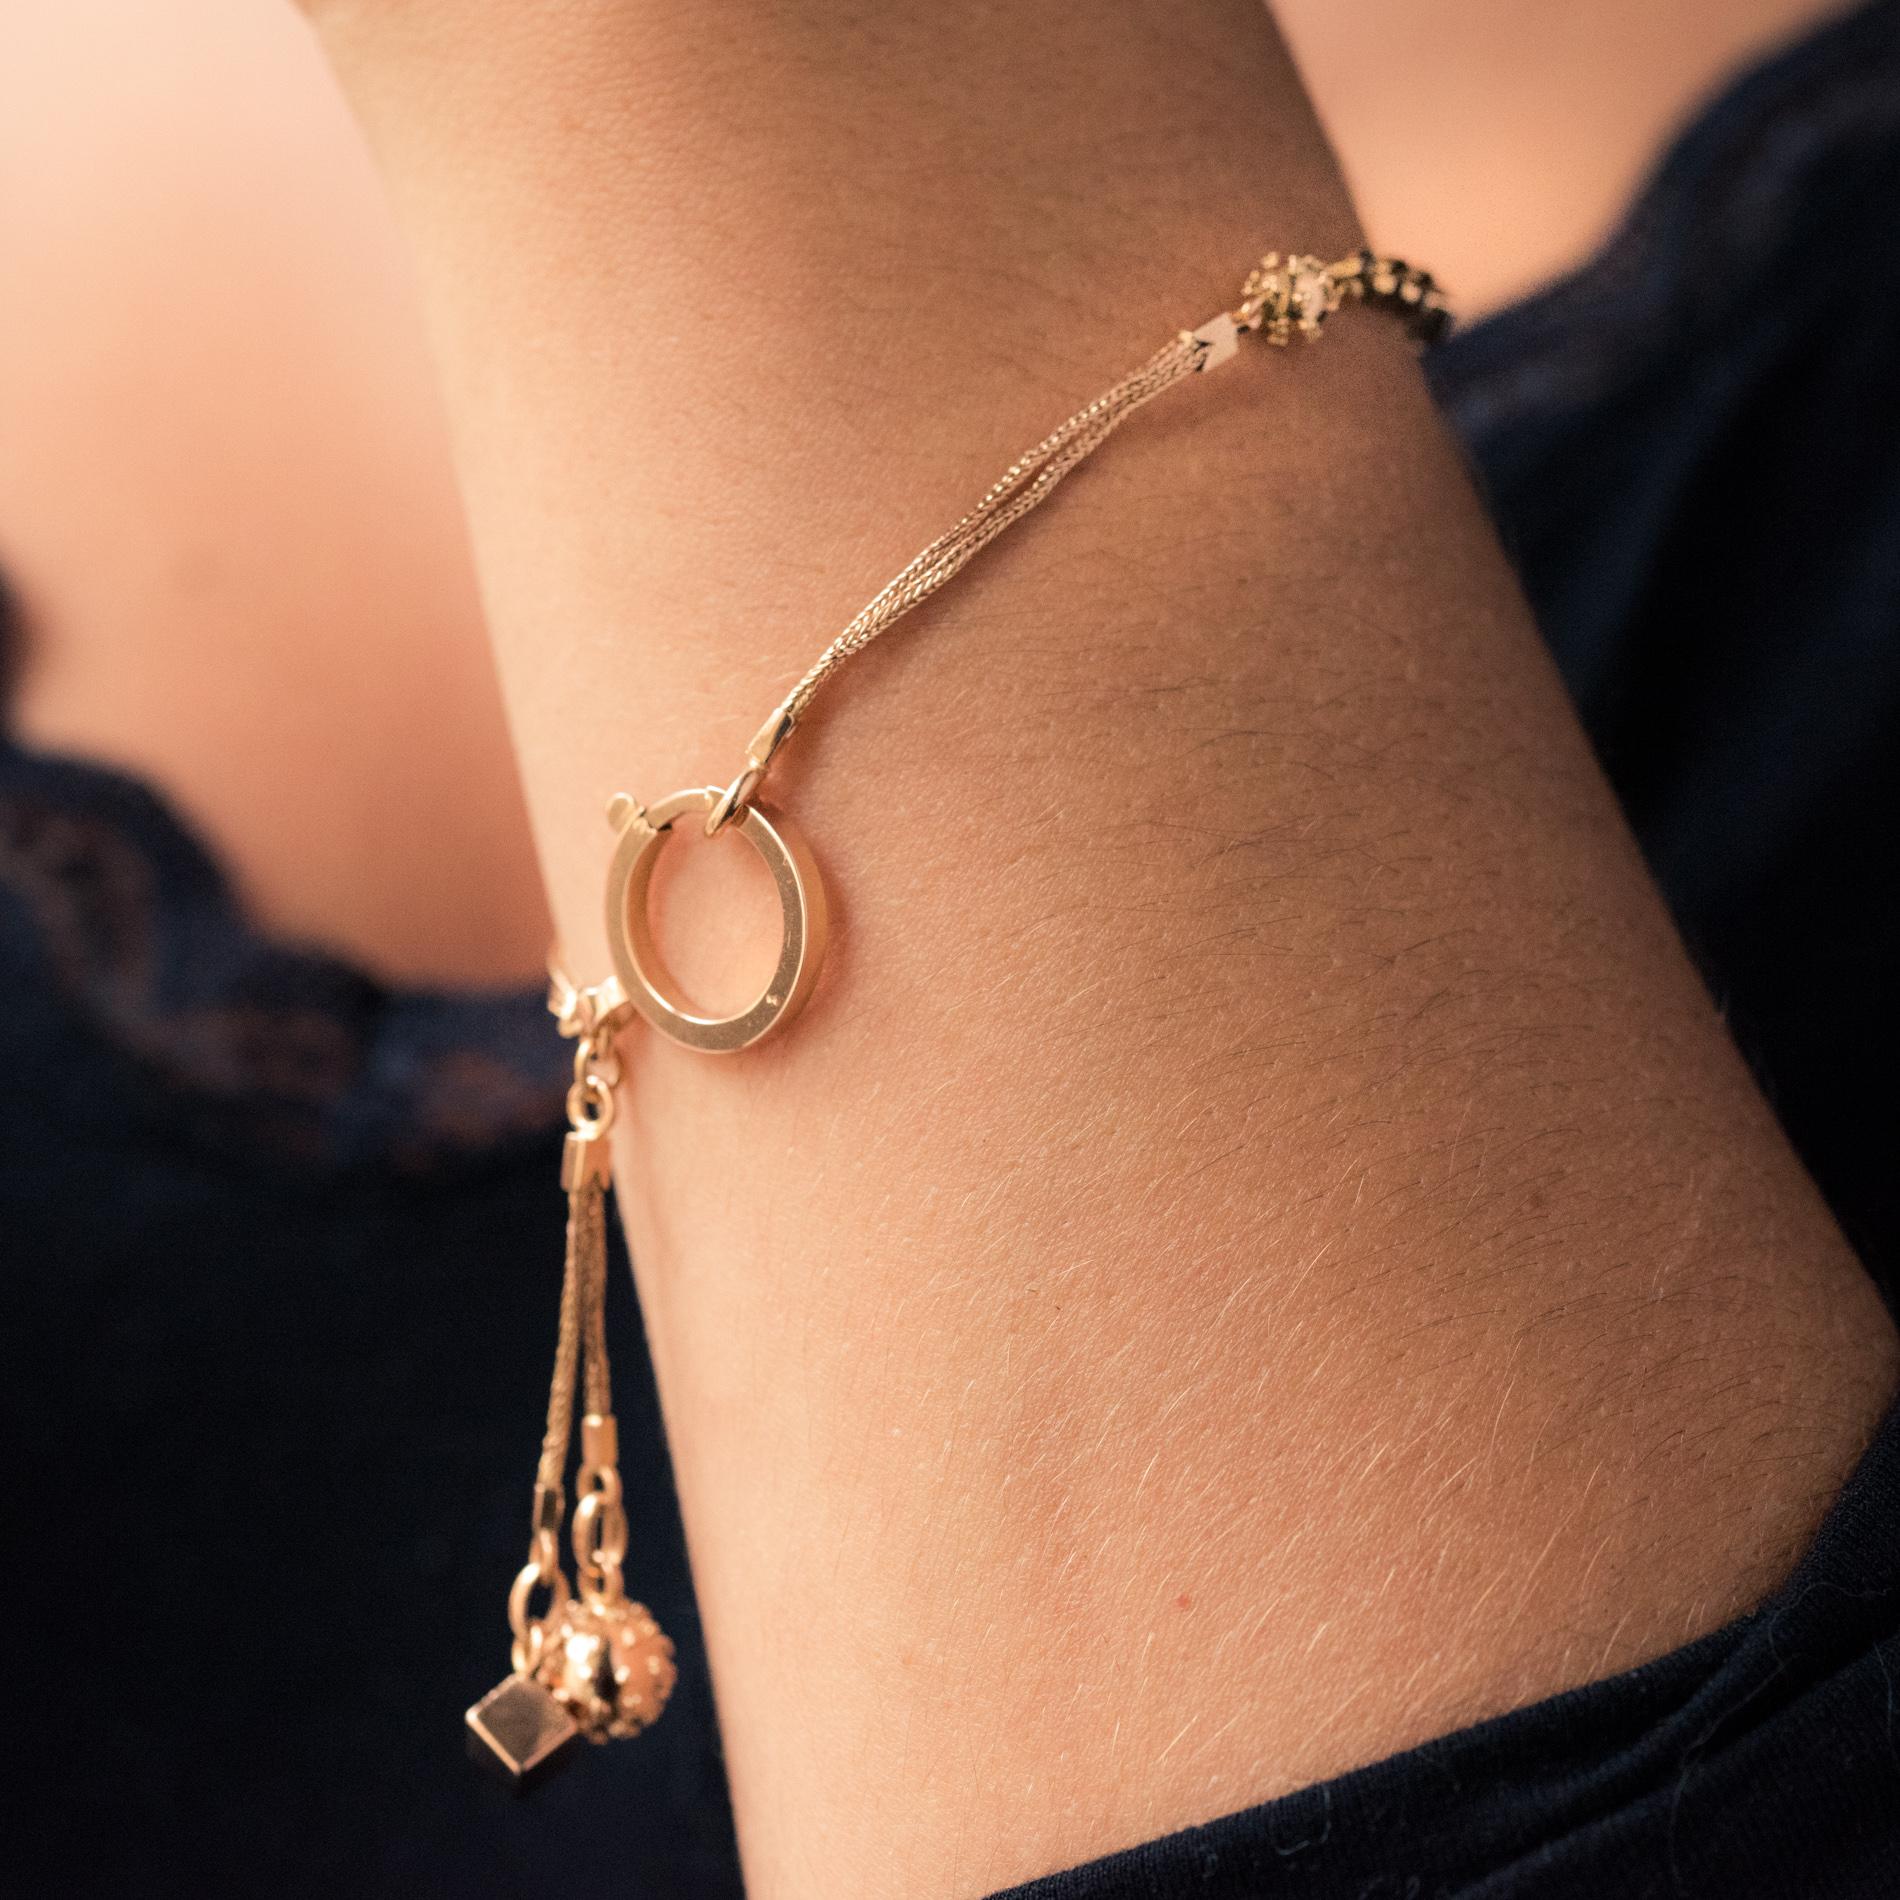 Bracelet in 18 karat rose gold, weevil hallmark.
Former small vest chain, it is formed of a column link which retains a convict link pattern alternating with small gold cubes and studded pearls. The clasp is a large antique spring ring. A tassel is